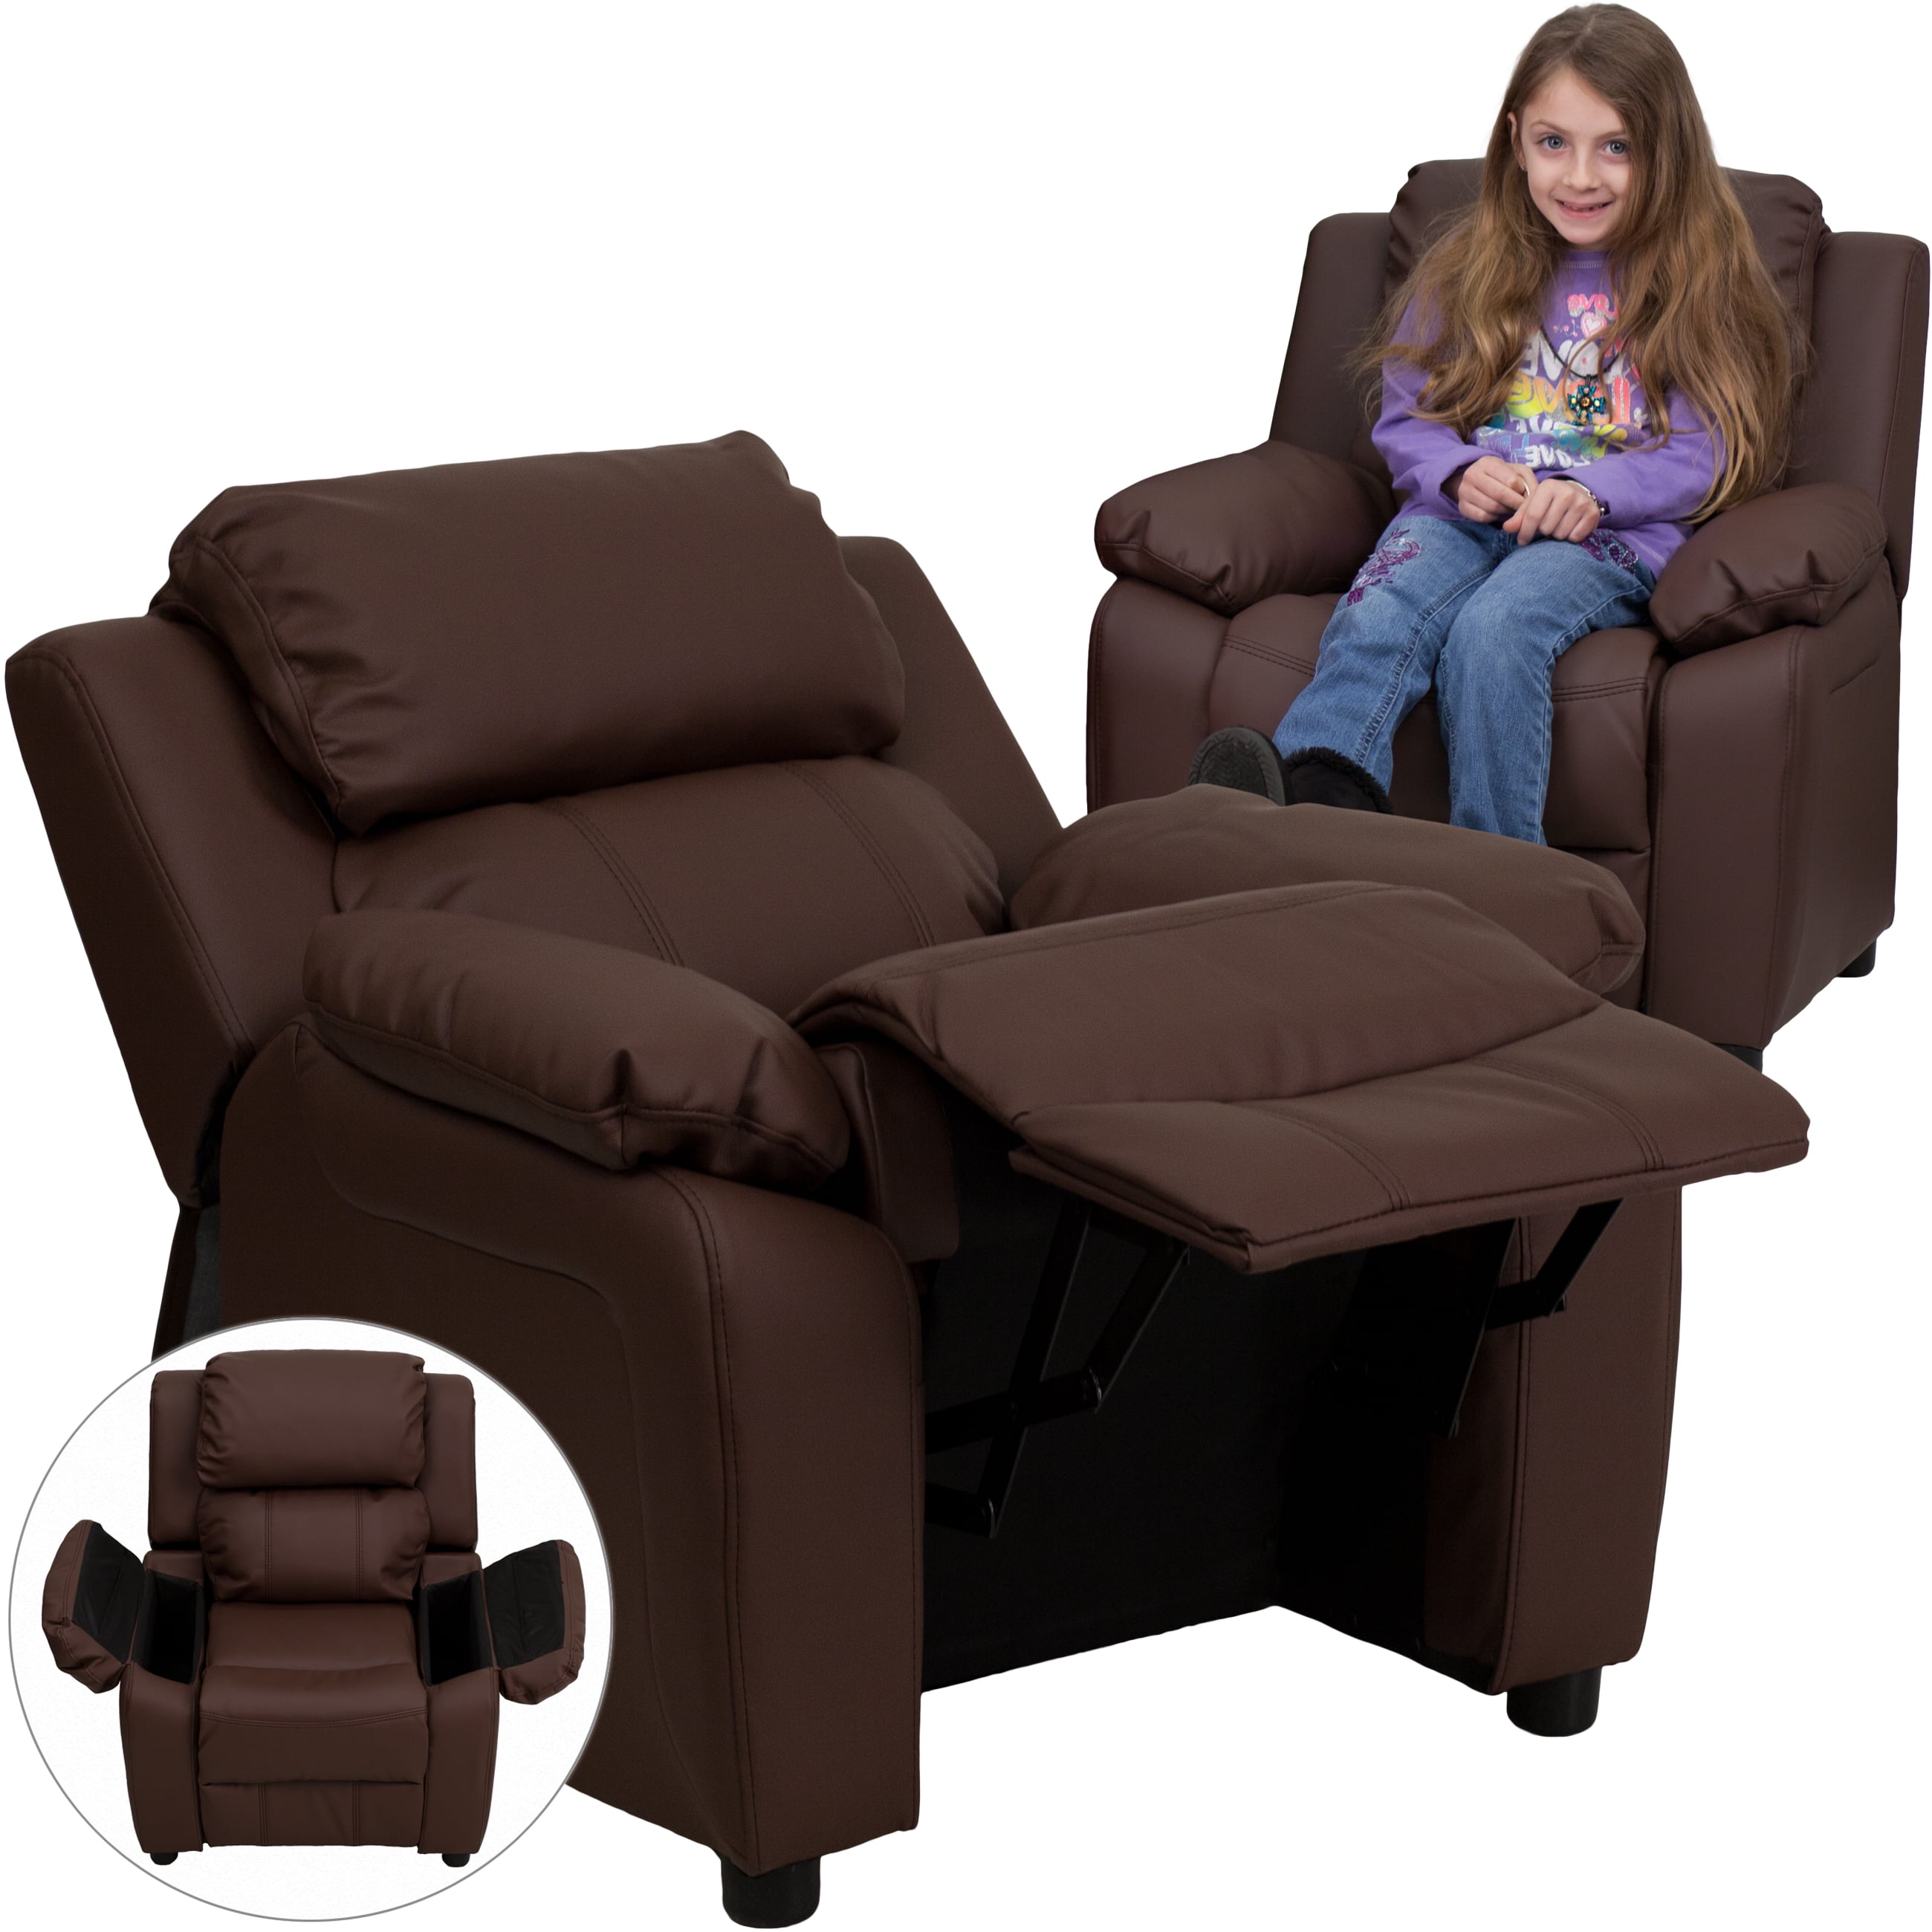 recliner chair for toddlers